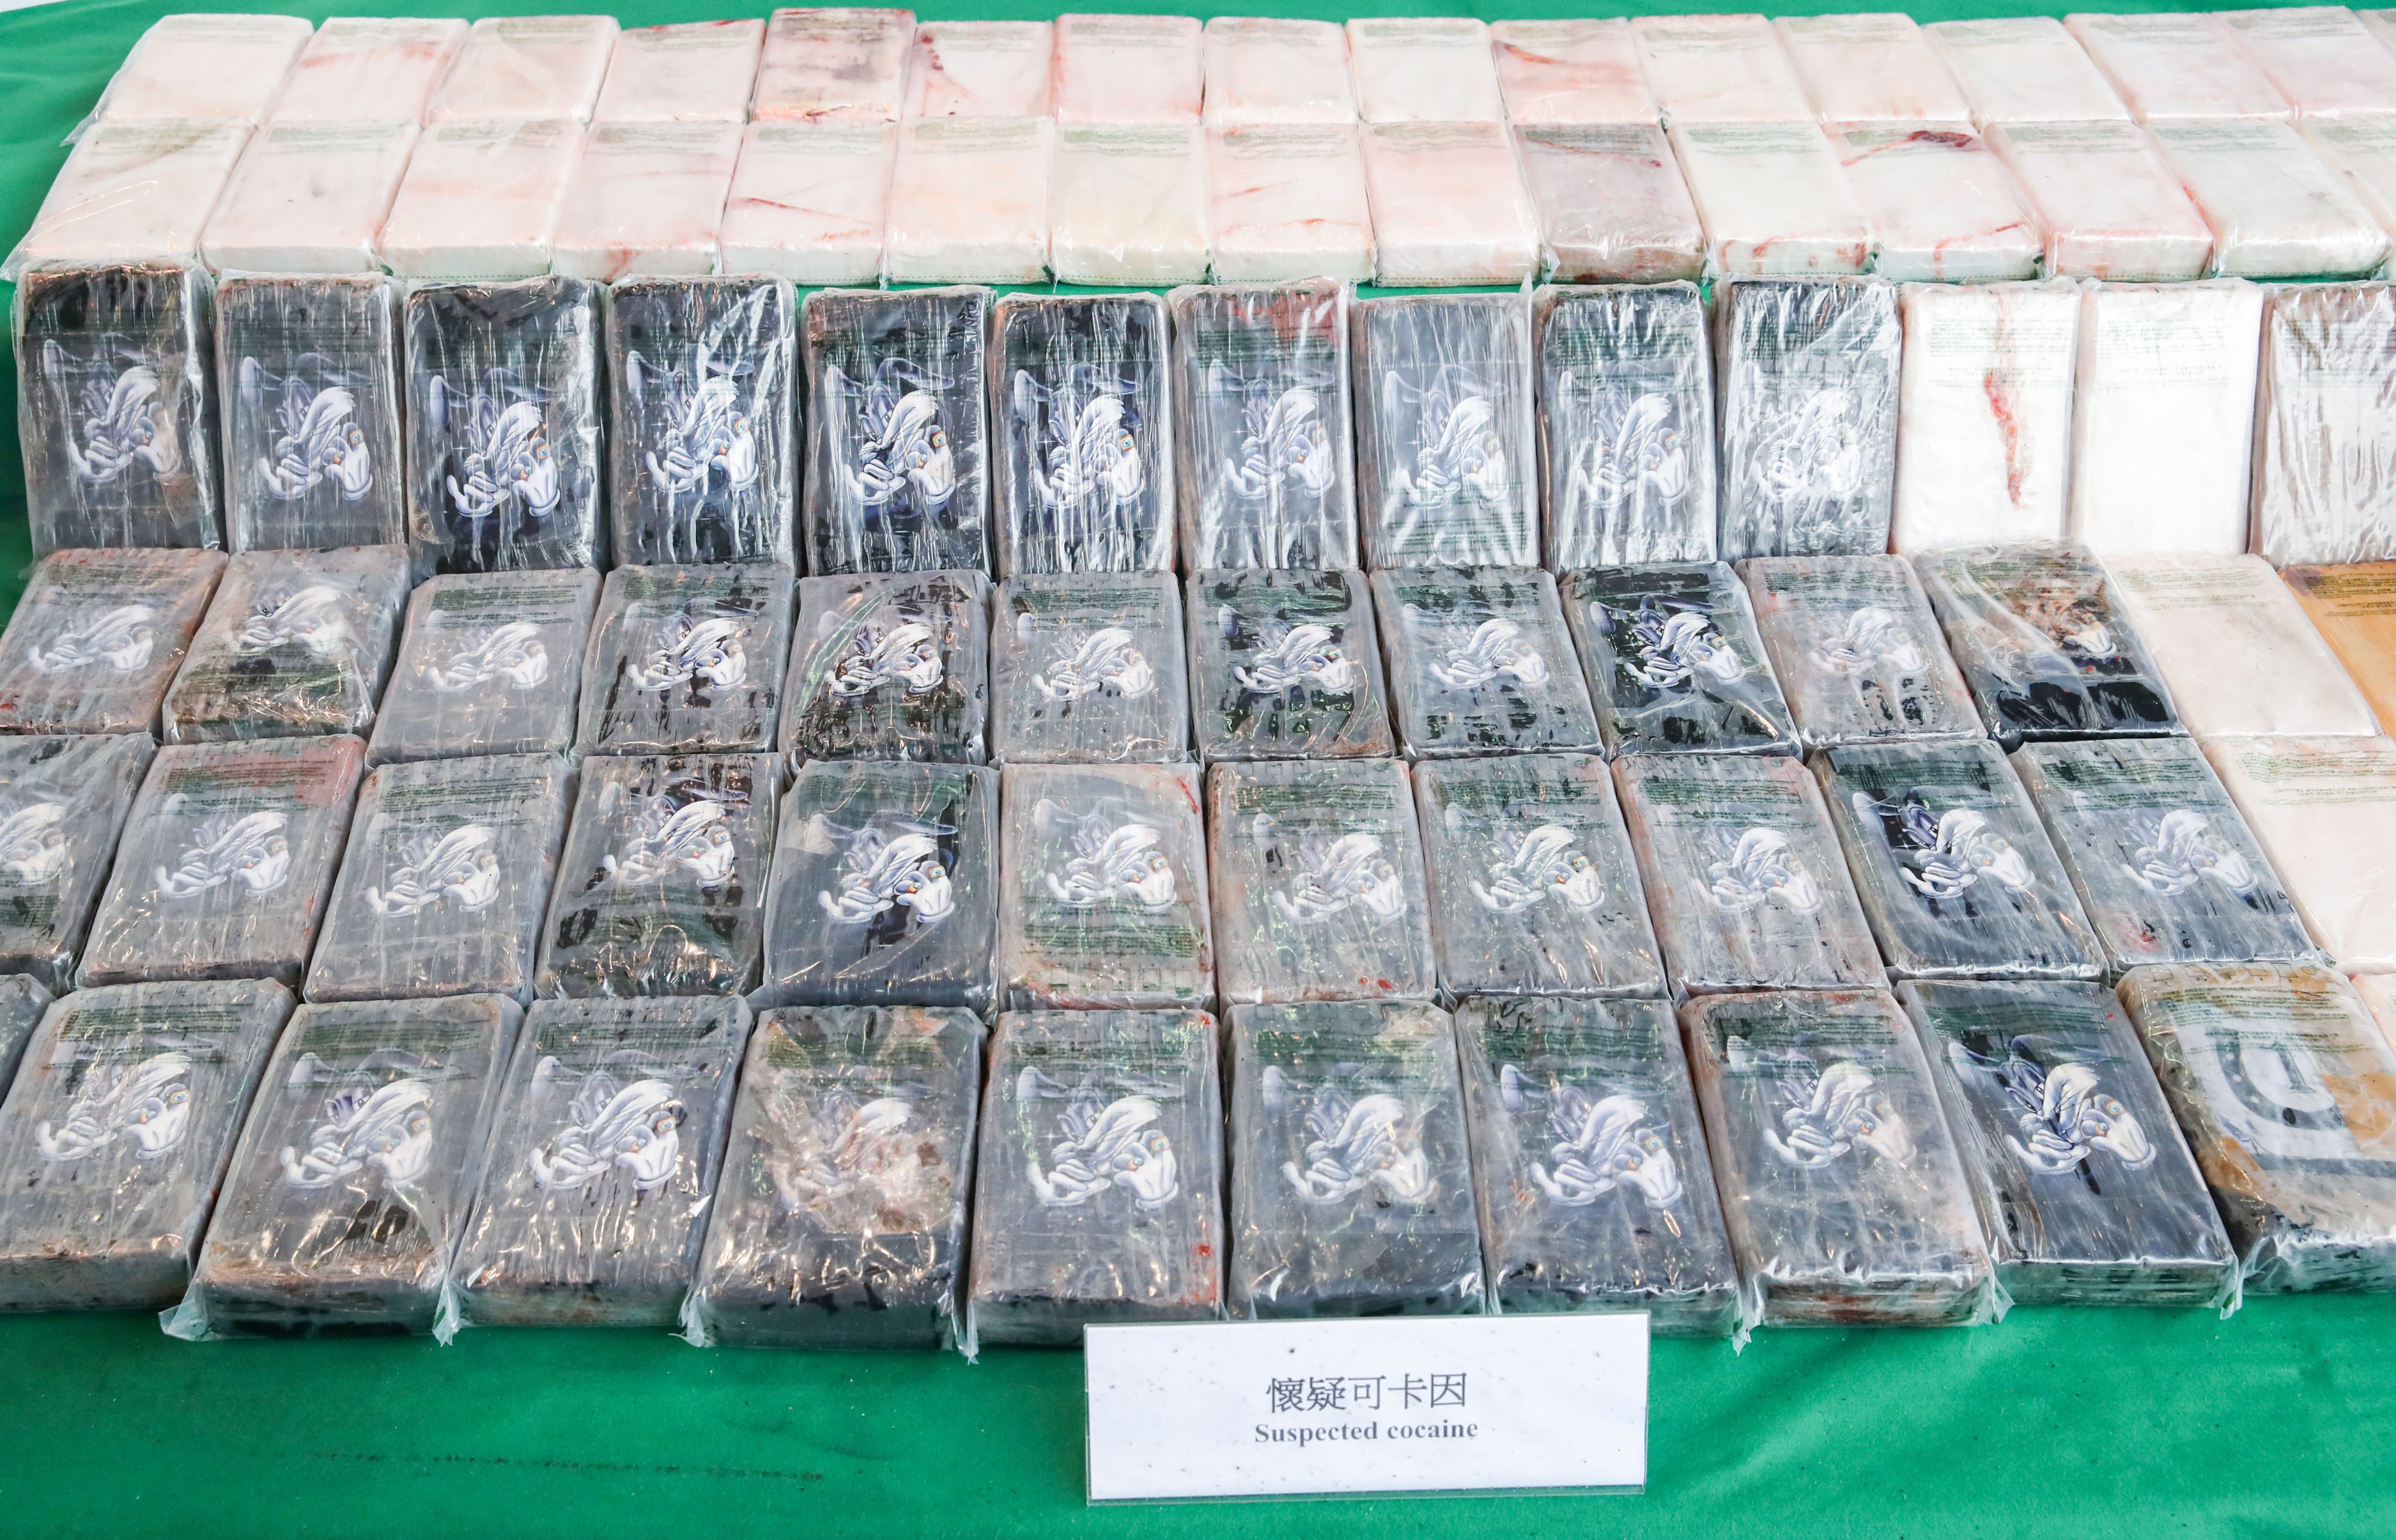 Hong Kong customs has confiscated HK$110 million worth of cocaine concealed in an electric transformer that arrived from Costa Rica. Photo:  Edmond So 